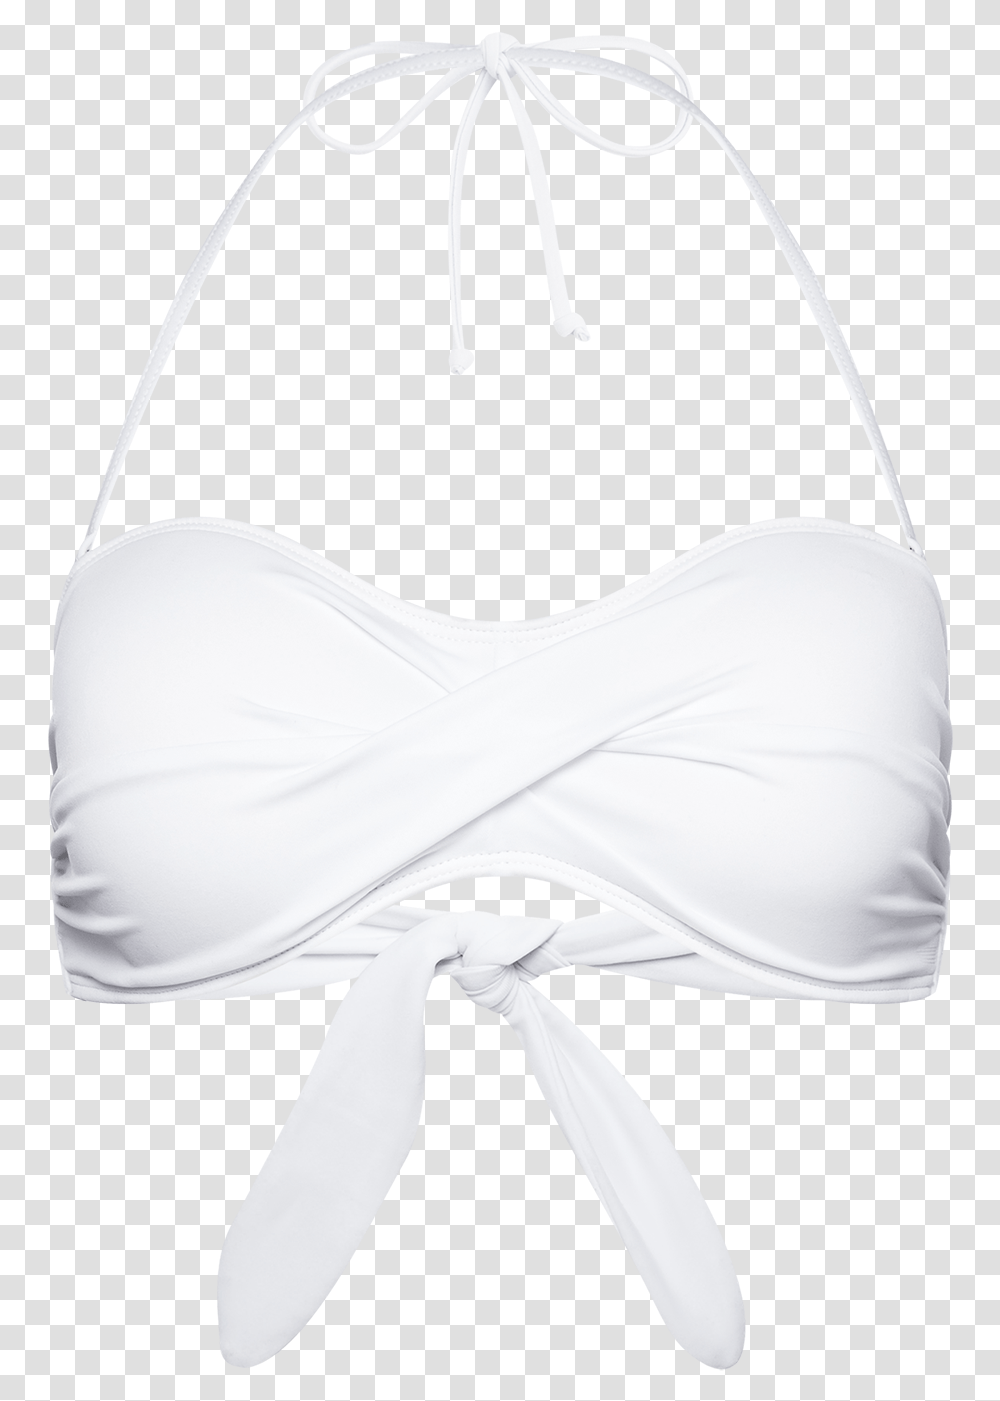 Swimsuit Bra Product Photography Swimsuit Top, Apparel, Pillow, Cushion Transparent Png